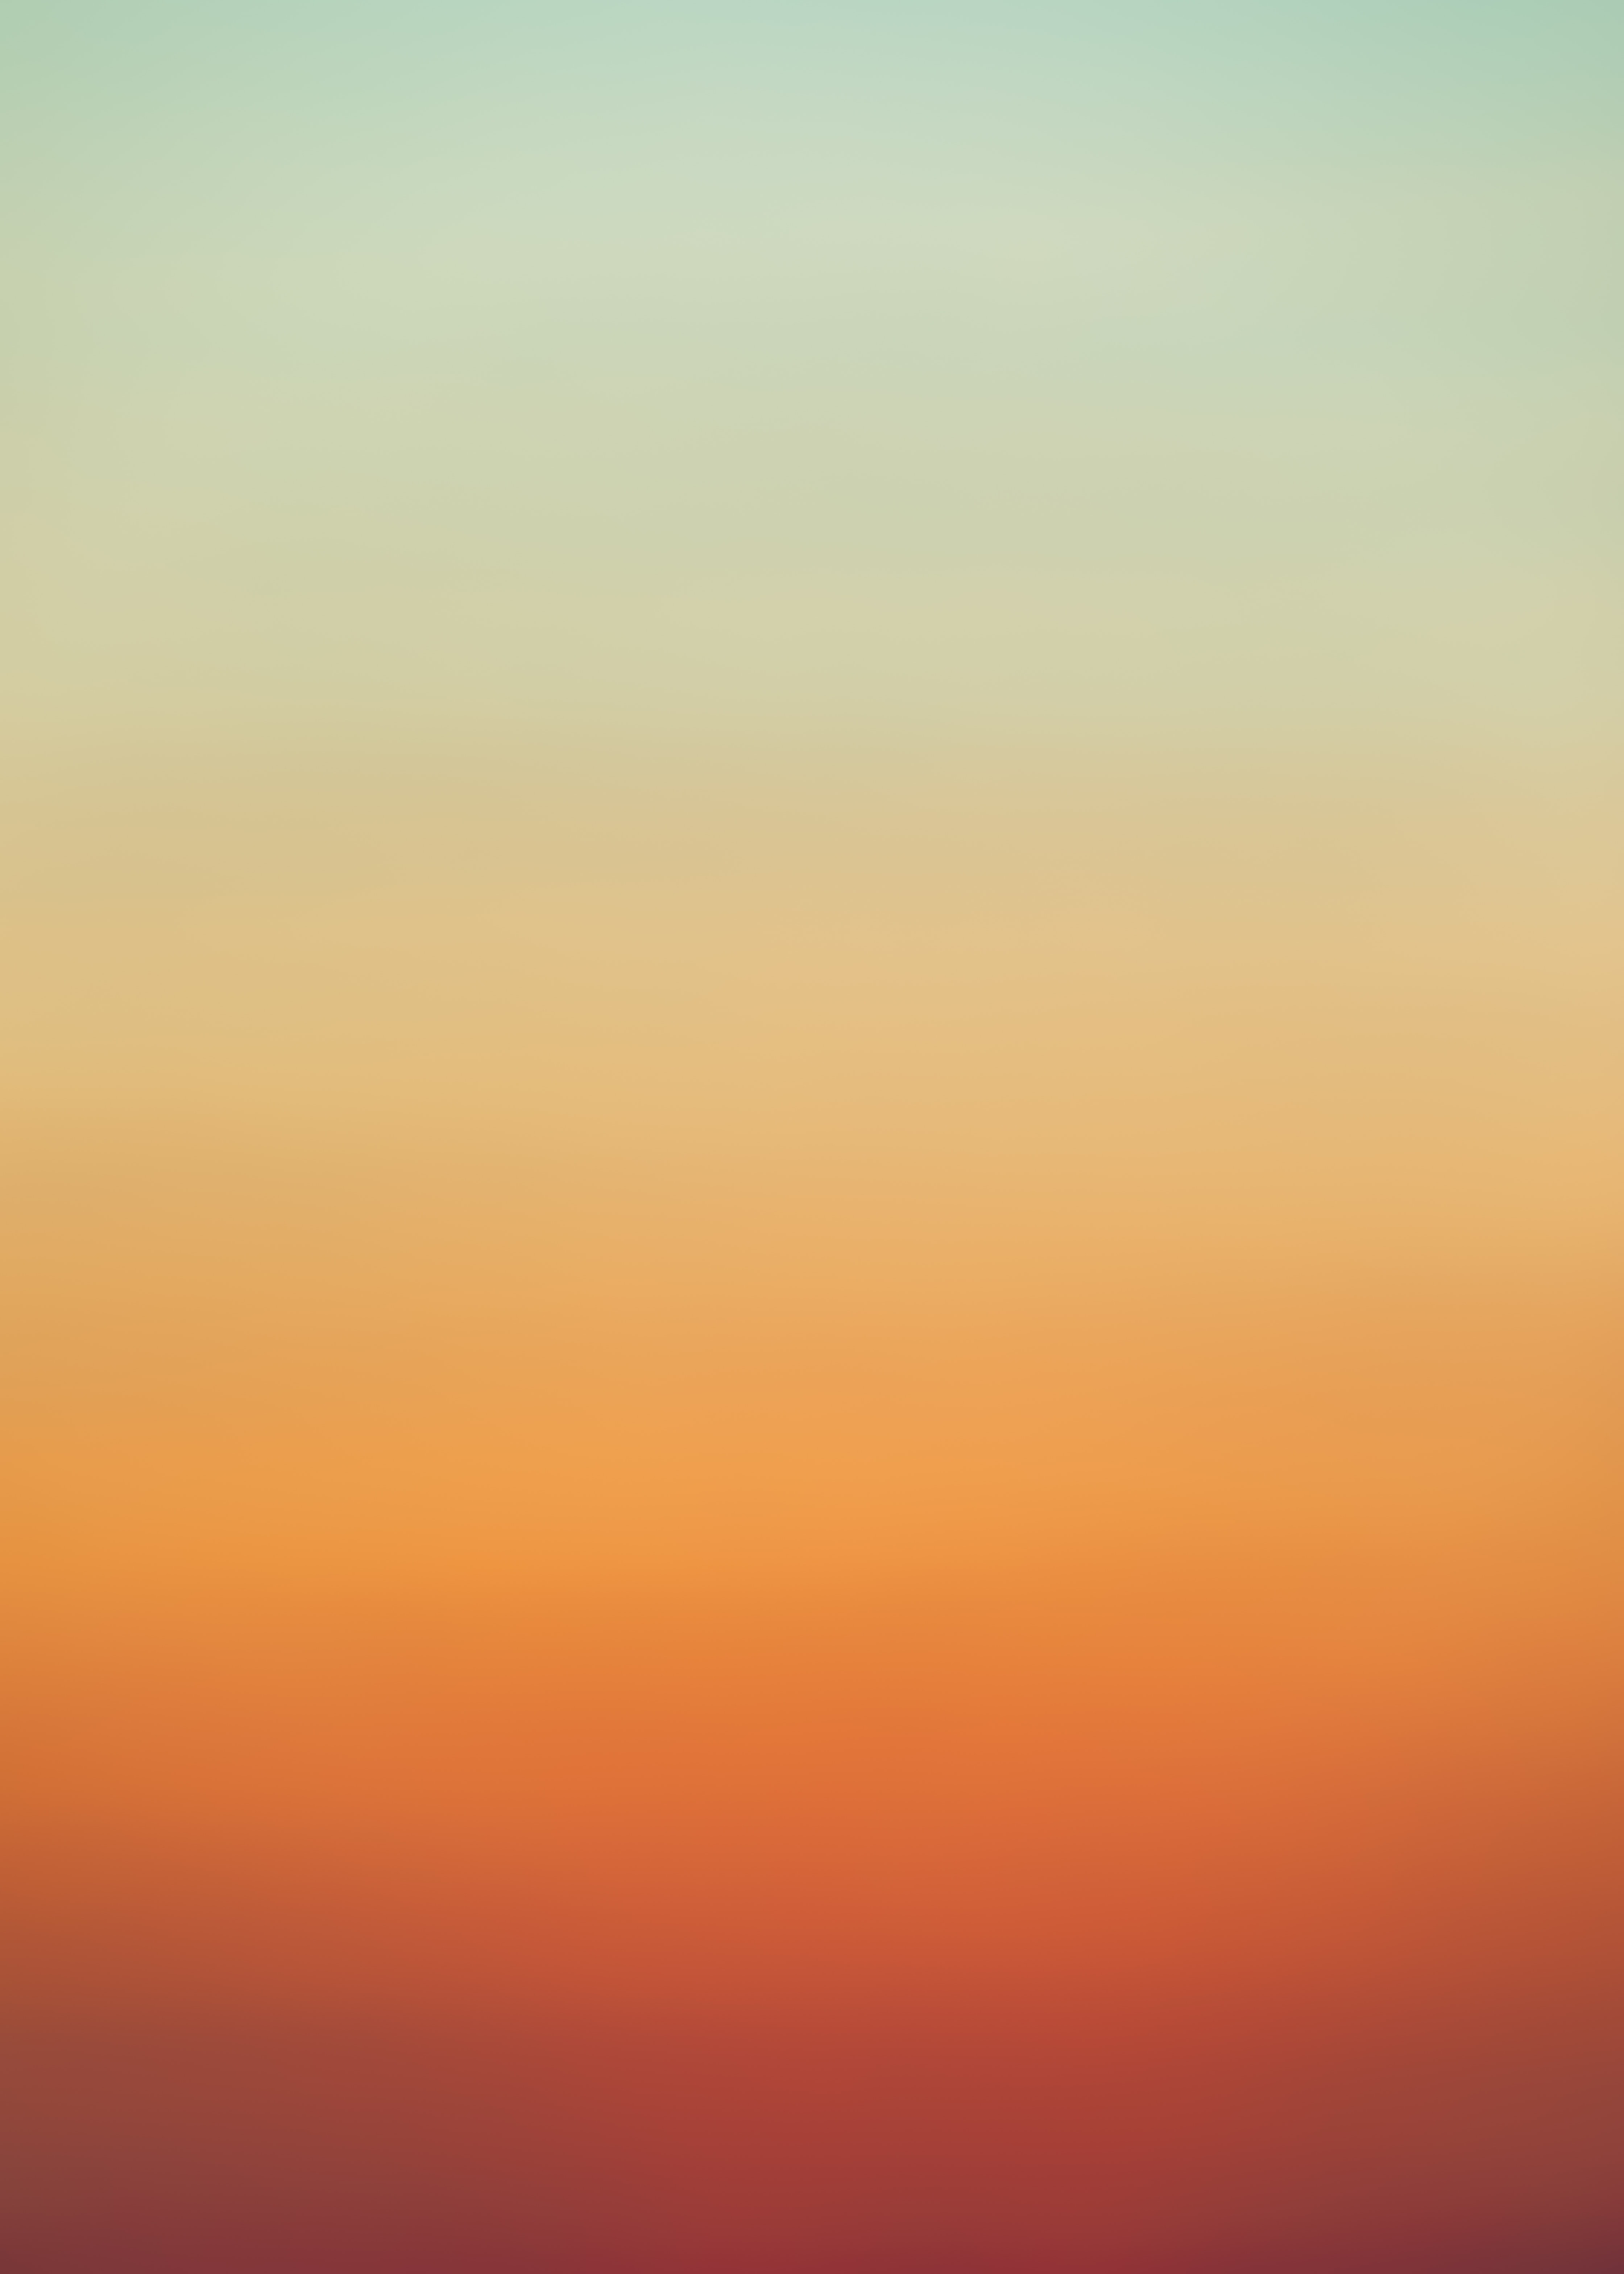 gradient, abstract, background, yellow, orange, color UHD